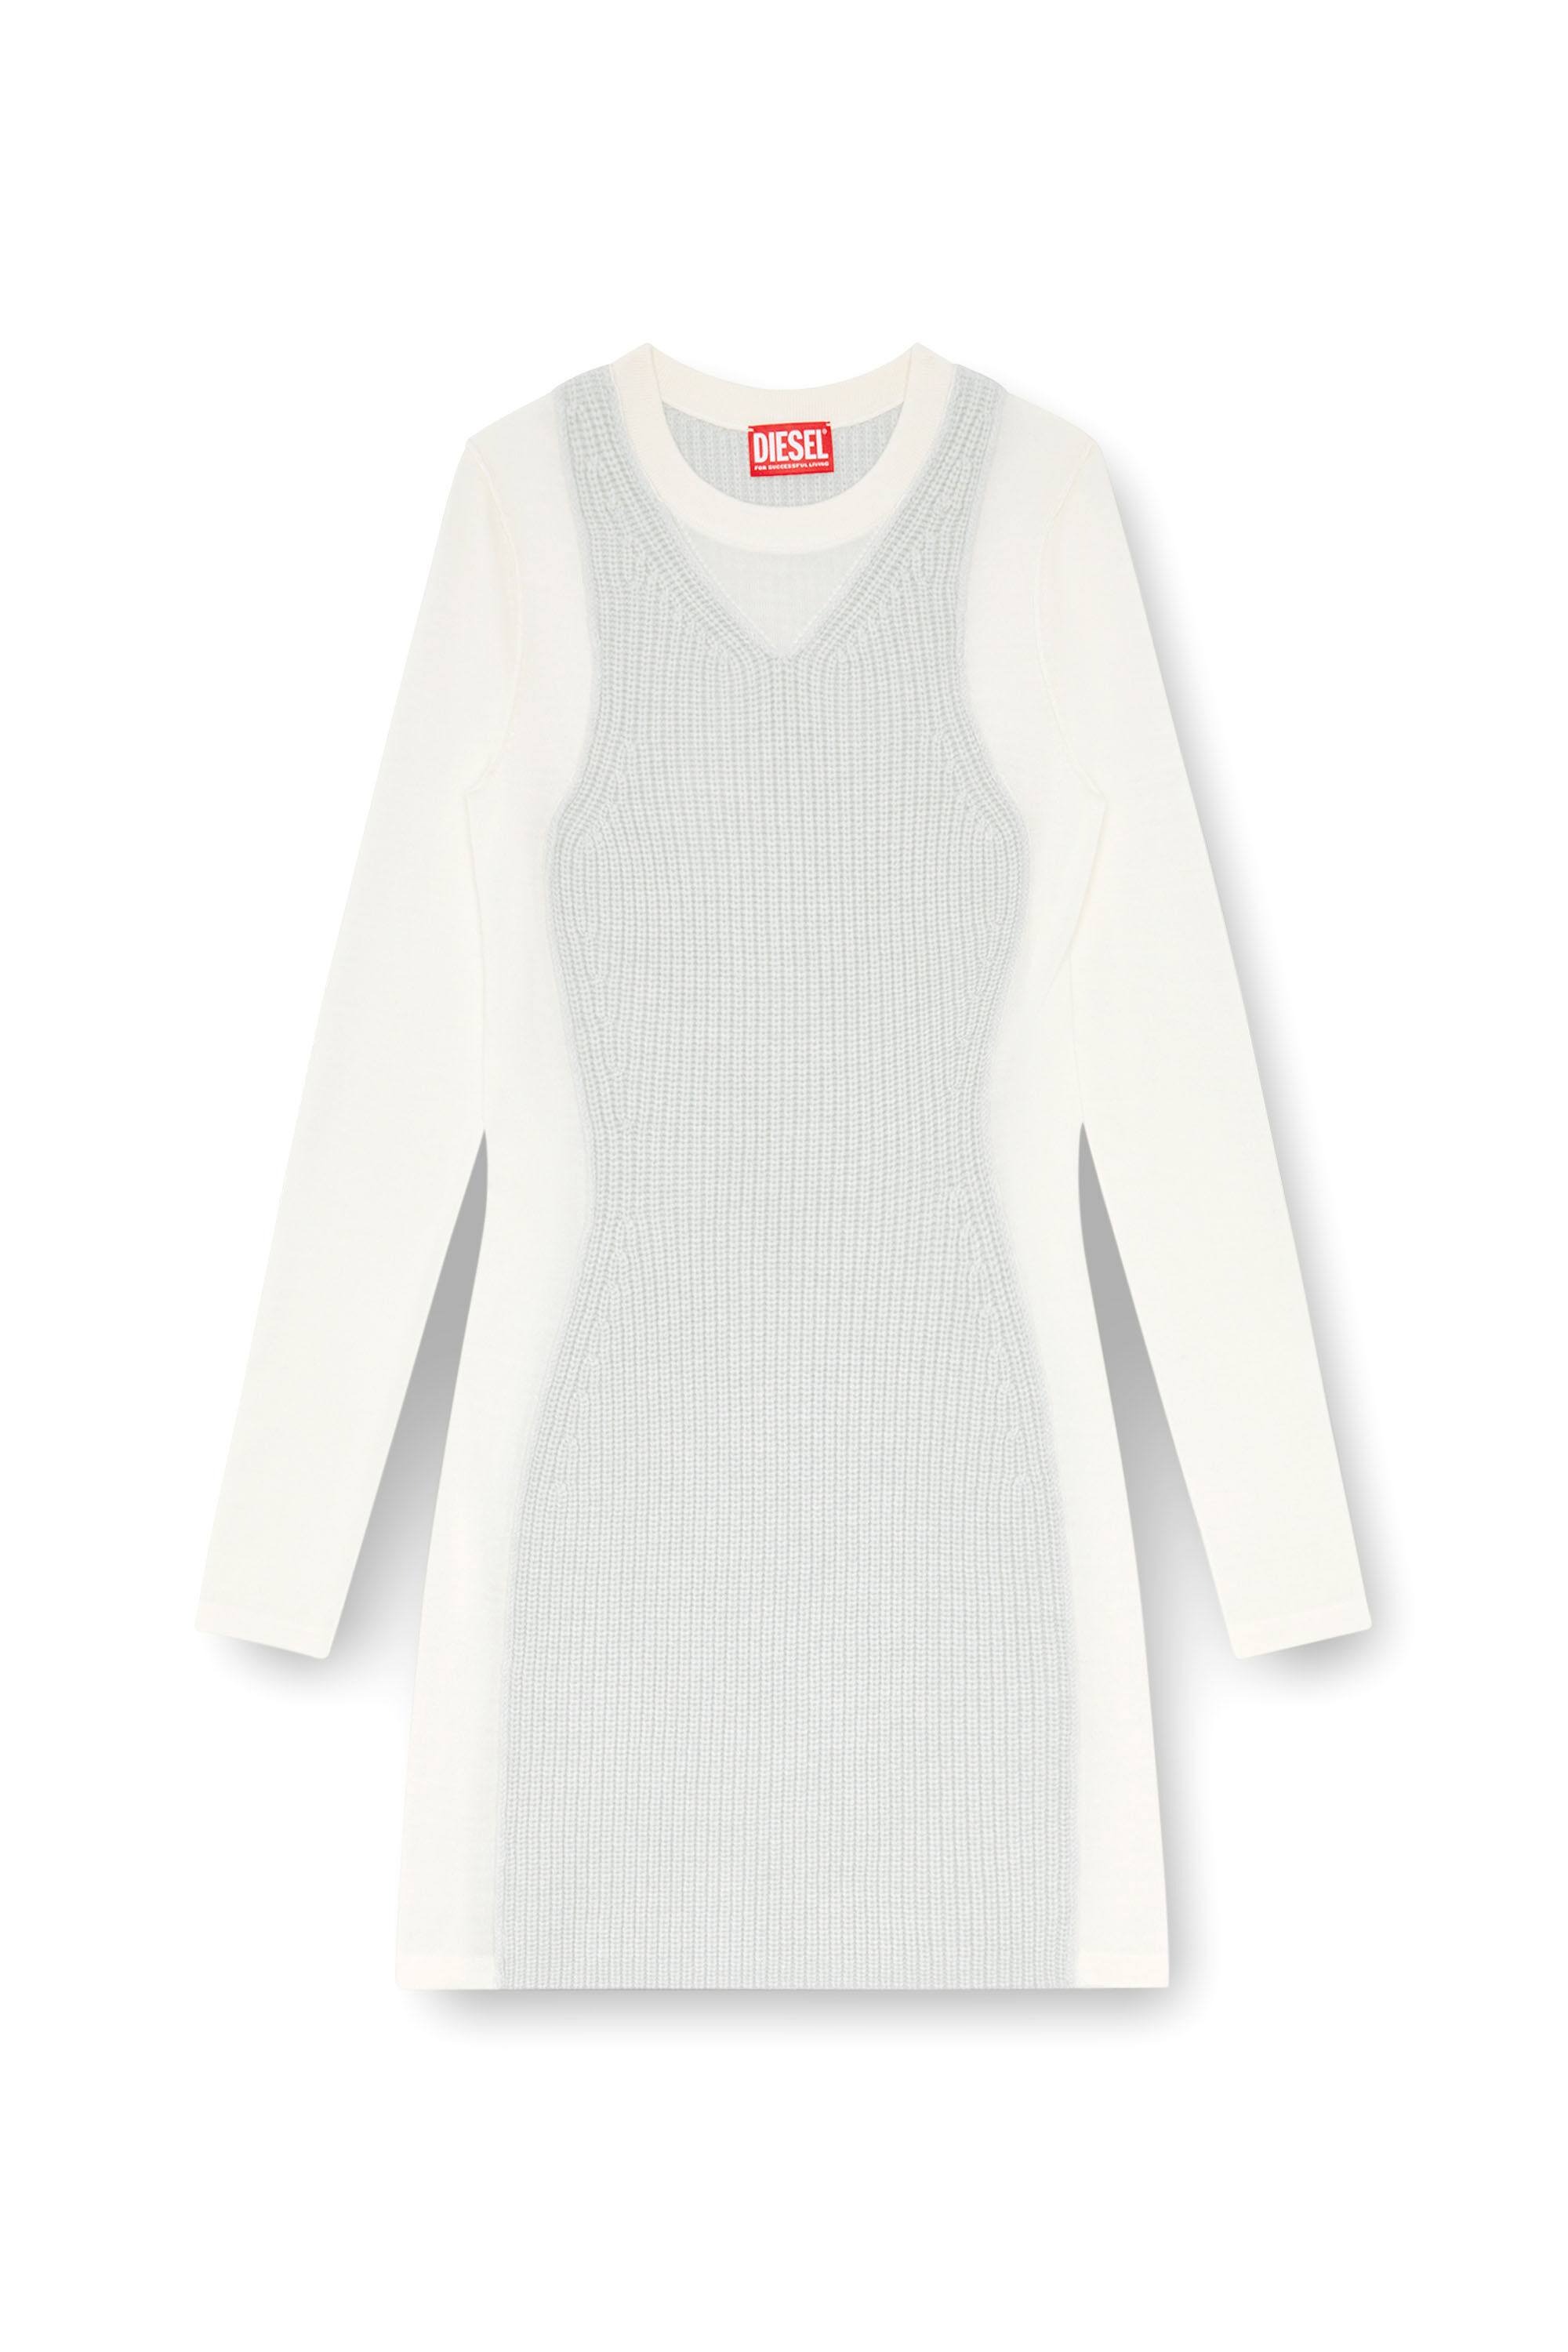 Diesel - M-ARENA, Woman Short knit dress with layered effect in White - Image 2